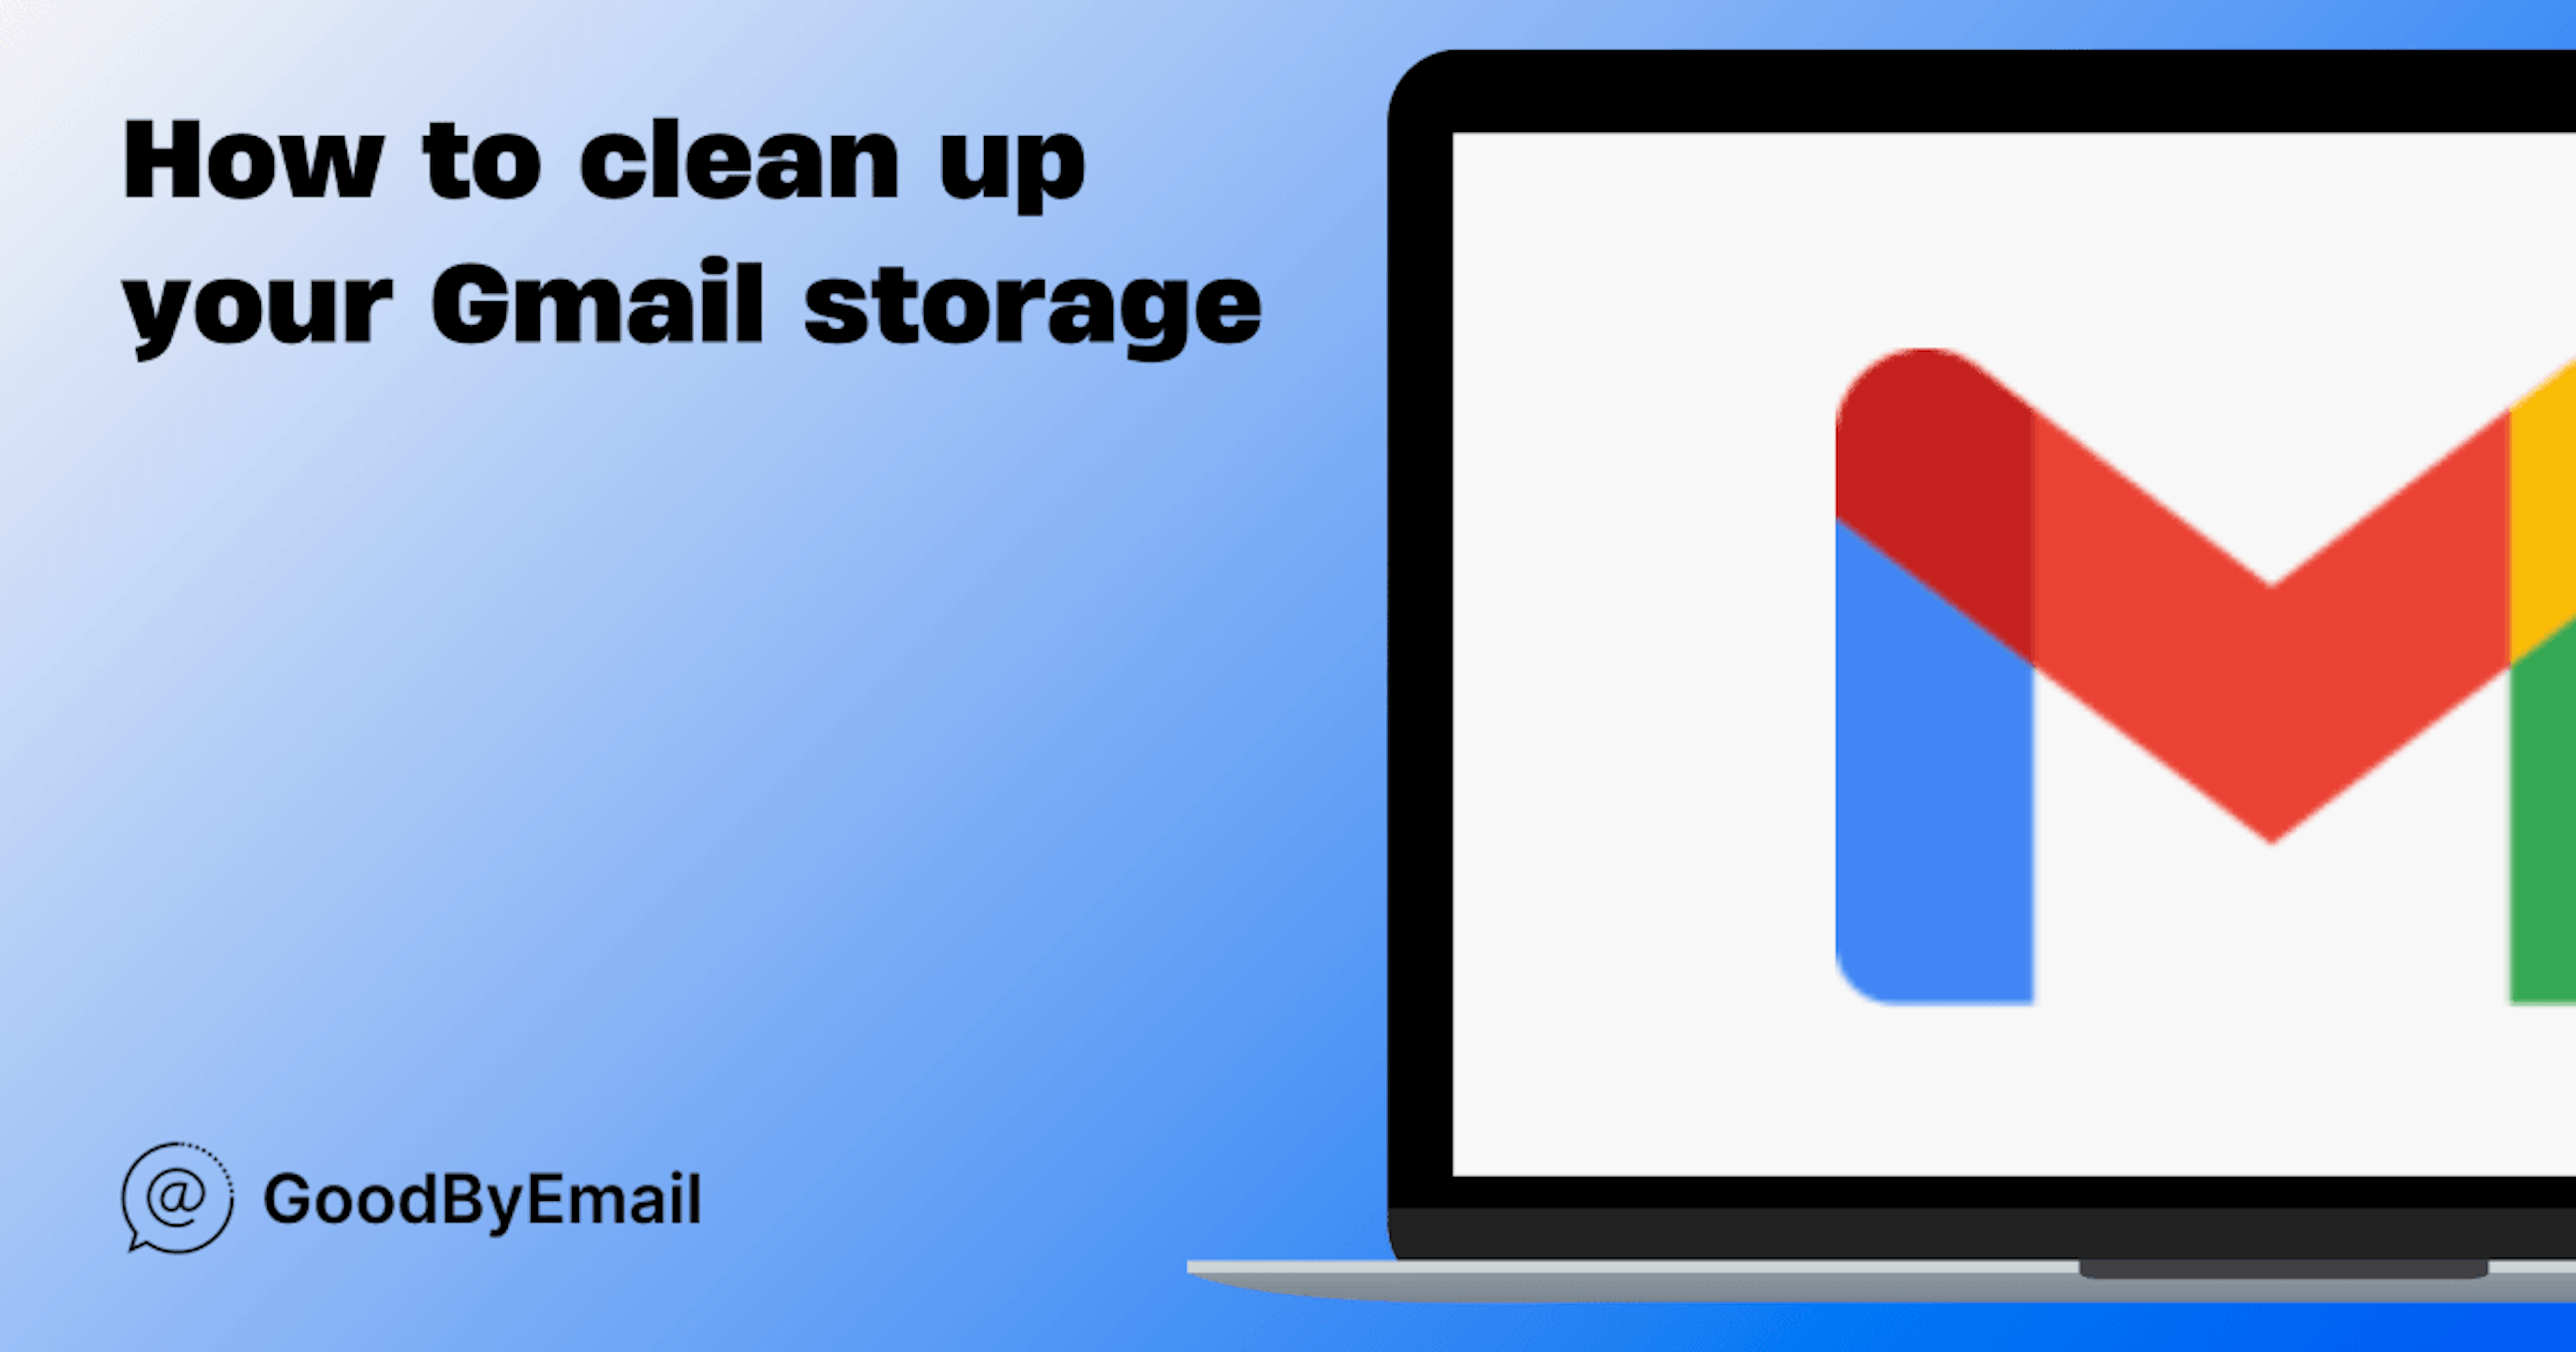 How to Clean Up Your Gmail Storage with GoodByEmail